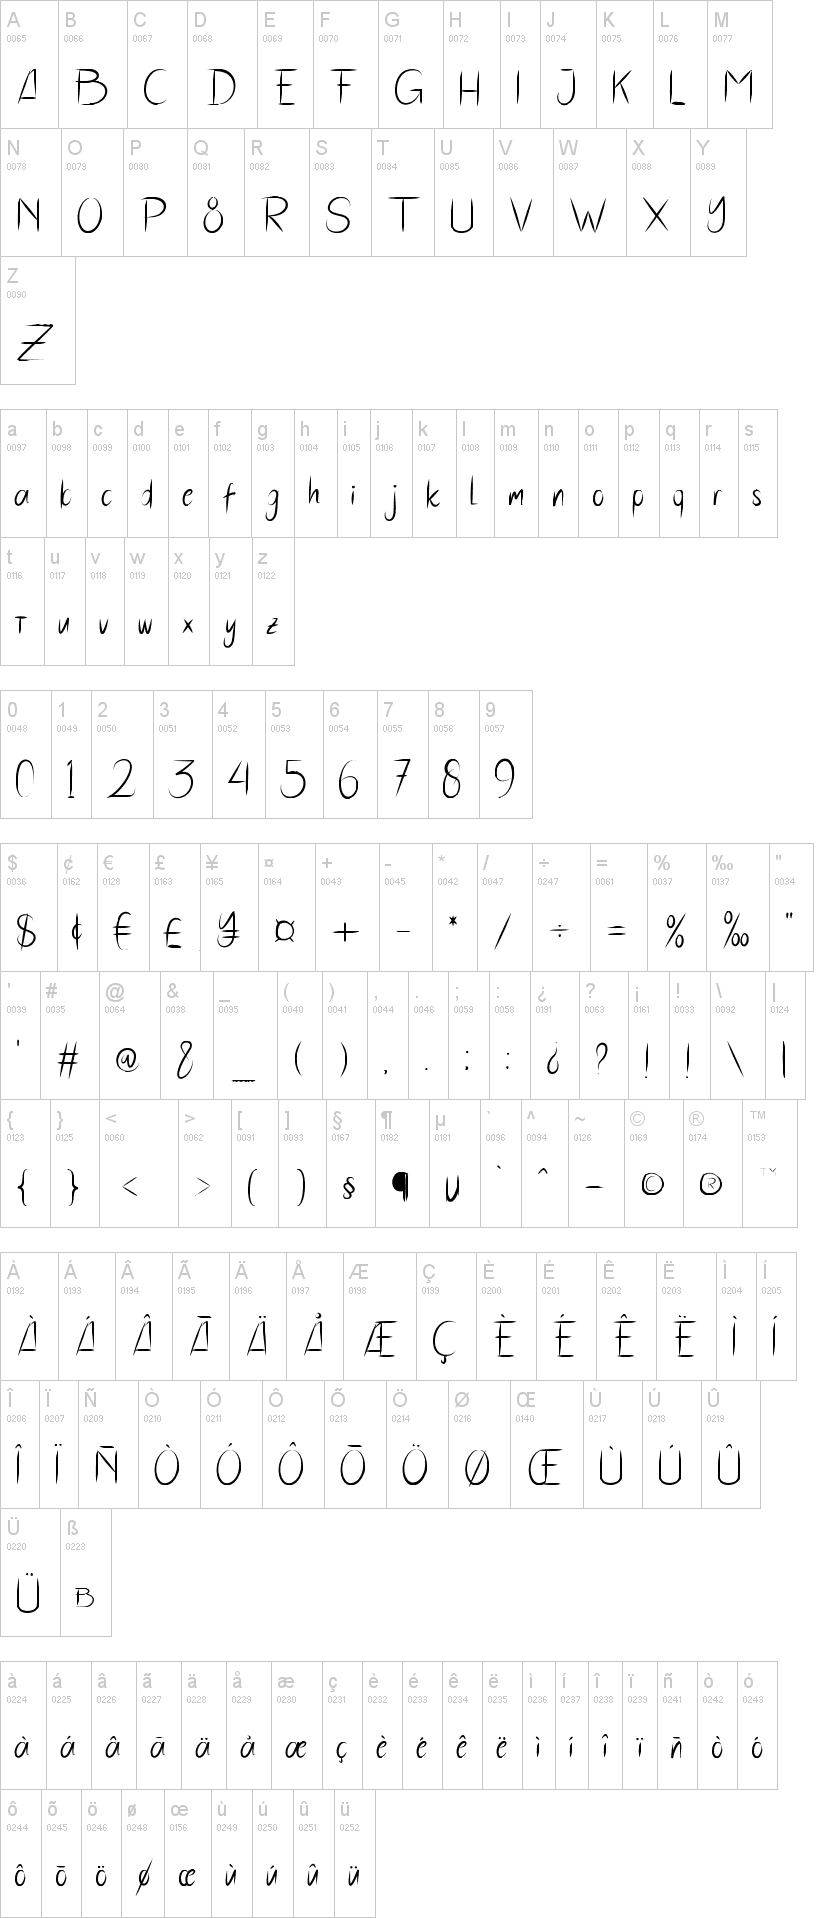 HairStyles Font 